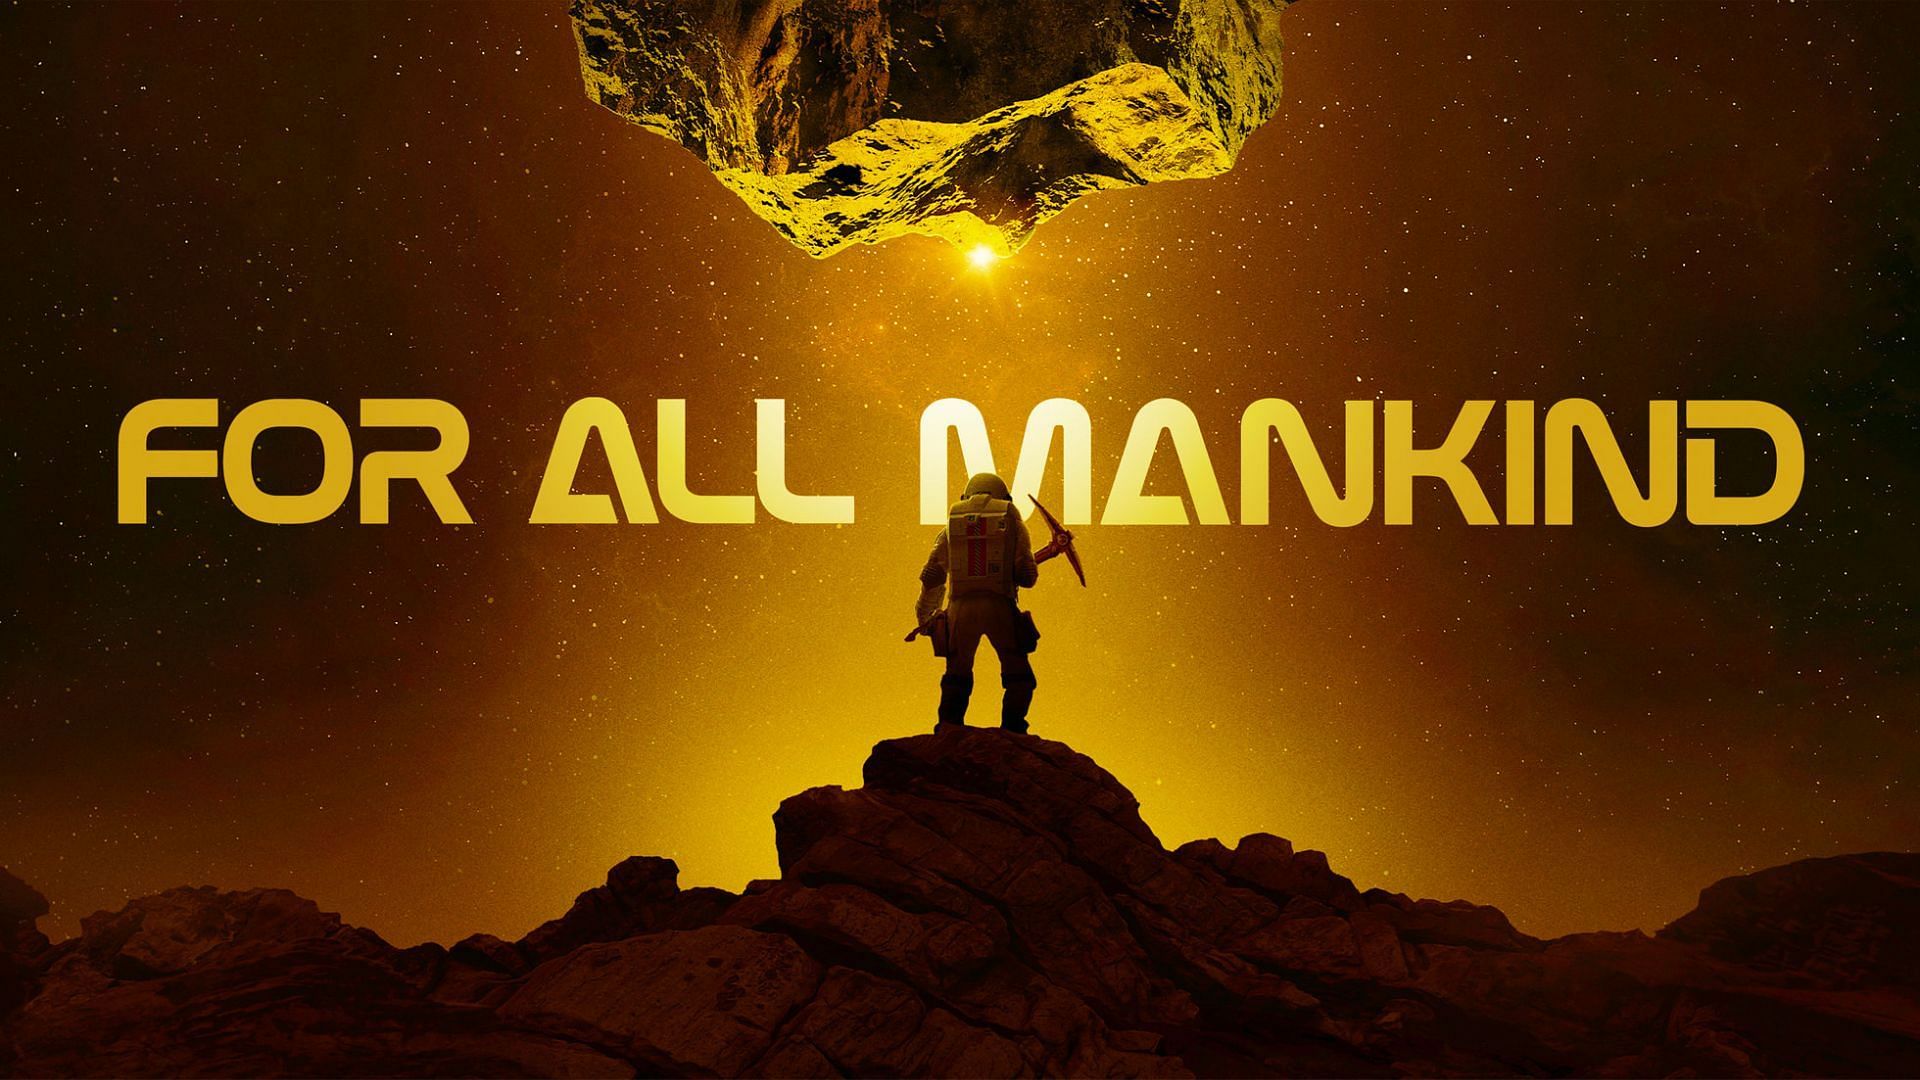 Apple TV+ has officially greenlit a spinoff series from the acclaimed show For All Mankind (Image via Apple)